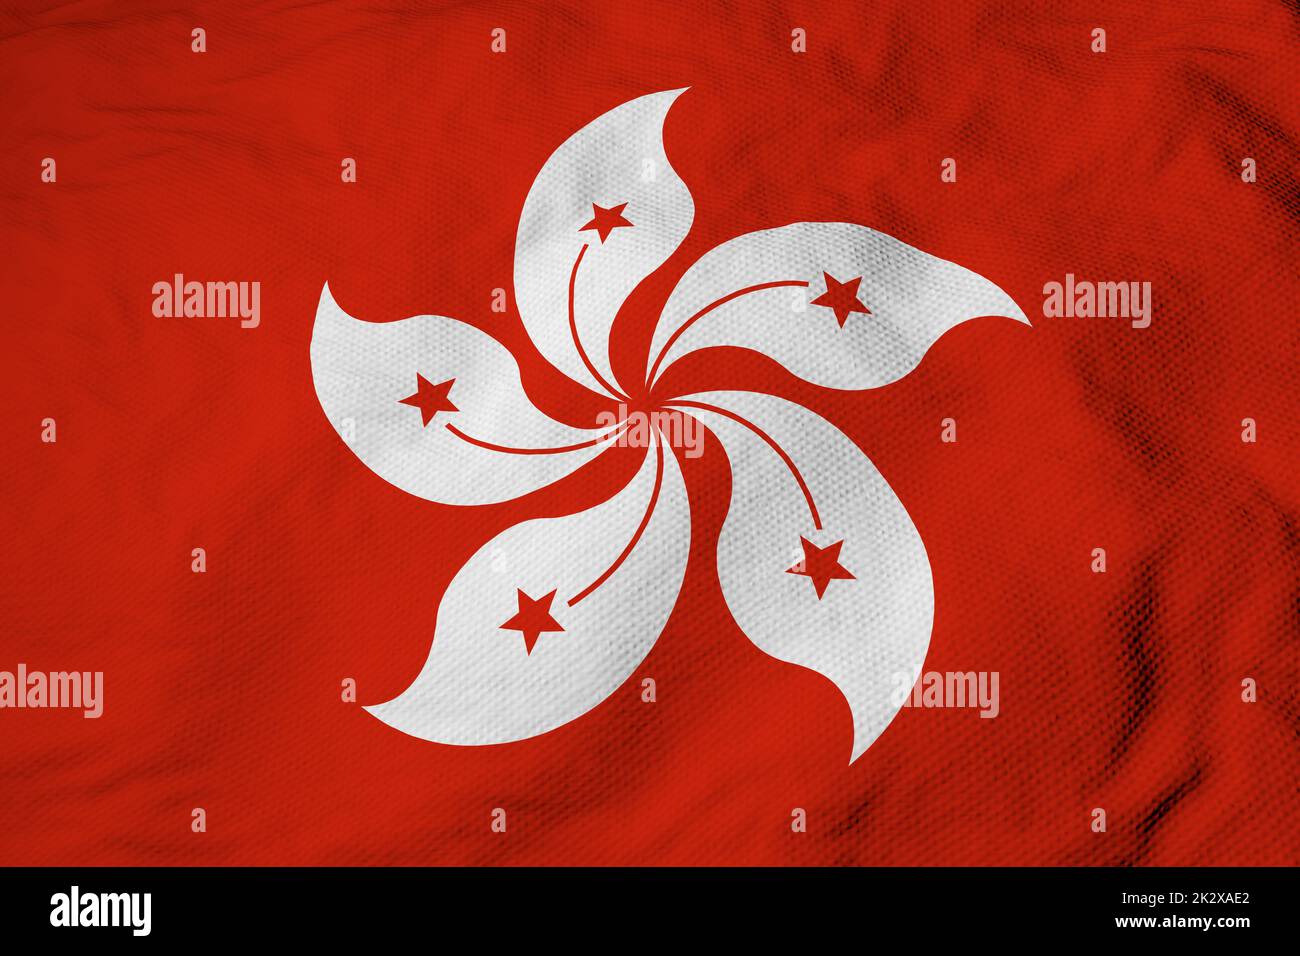 Full frame close-up on a waving Flag of Hong Kong in 3D rendering. Stock Photo